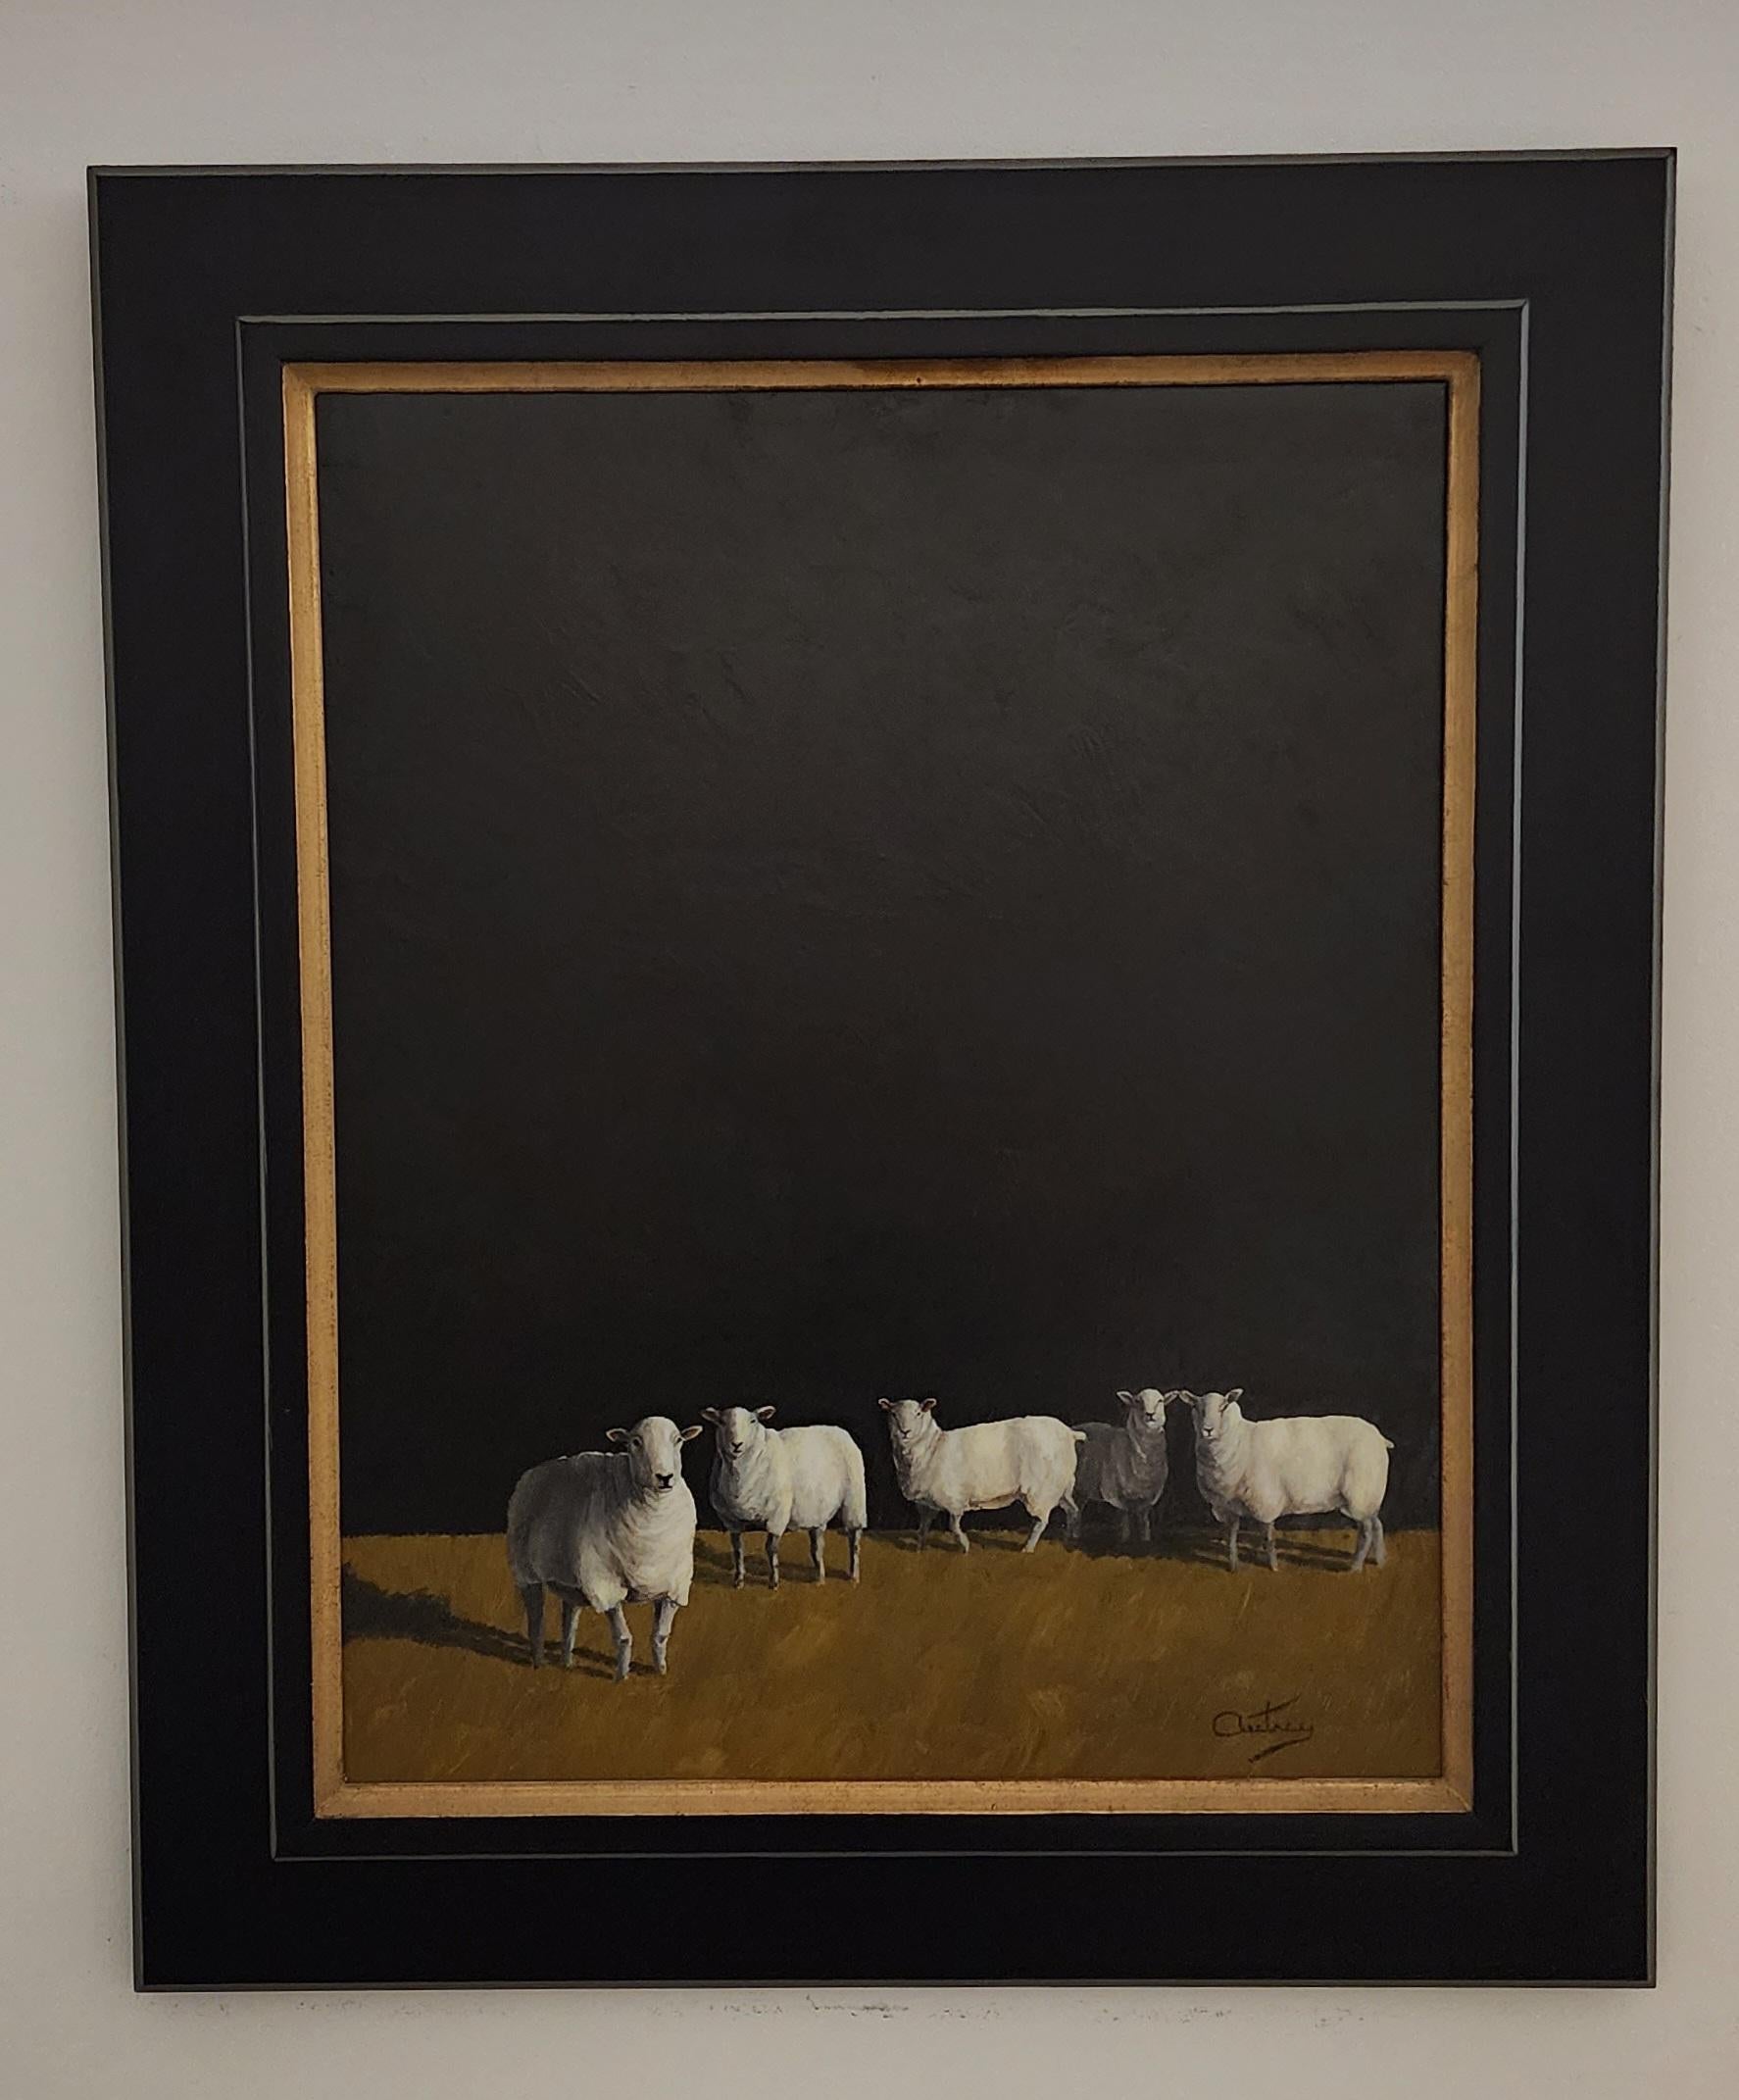   LOOK FOR FREE SHIPPING AT CHECKOUT. IF NOT AVAILABLE GALLERY PAYS FOR SHIPPING IN USA.   ALSO SHOWN ARE OTHER AVAILABLE PAINTINGS.
Sheep (Ovejas) in the Field  is an oil painting that was completed in February 2023.. It has a  custom made frame